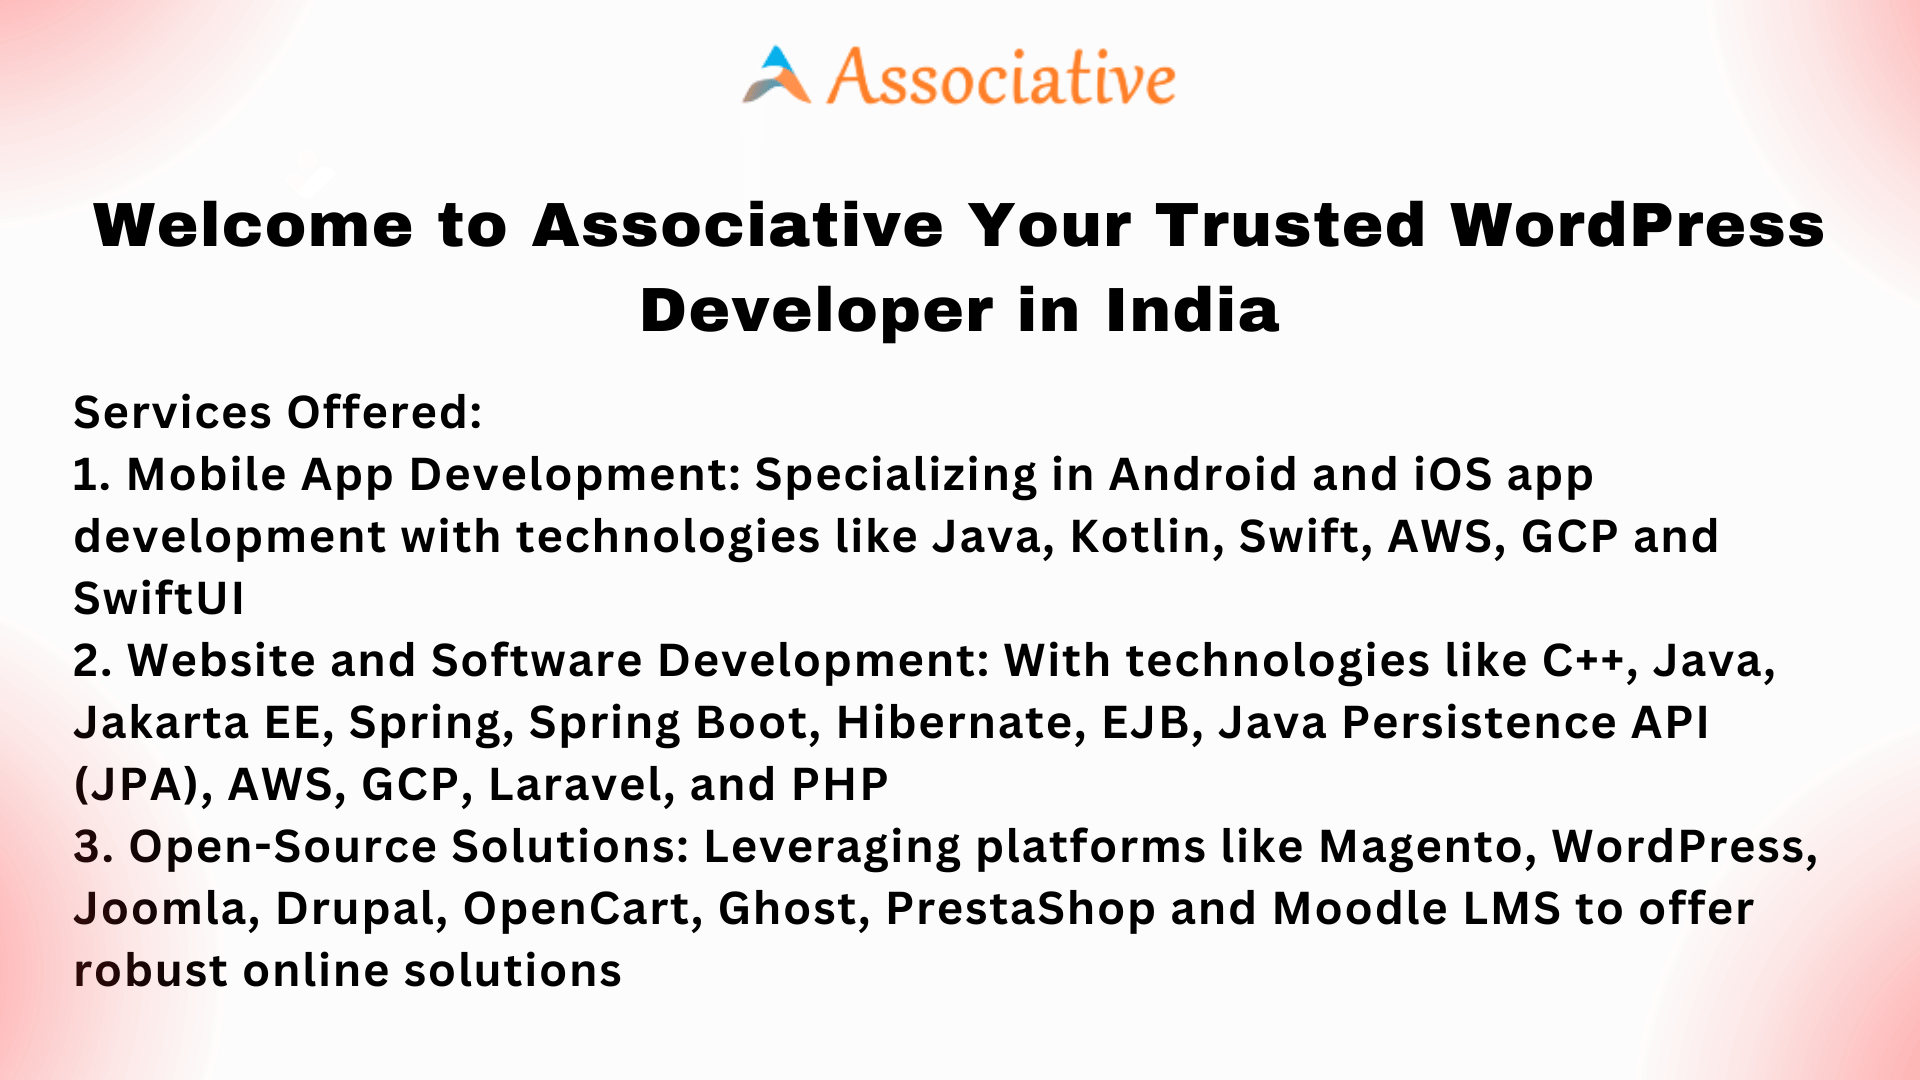 Welcome to Associative Your Trusted WordPress Developer in India